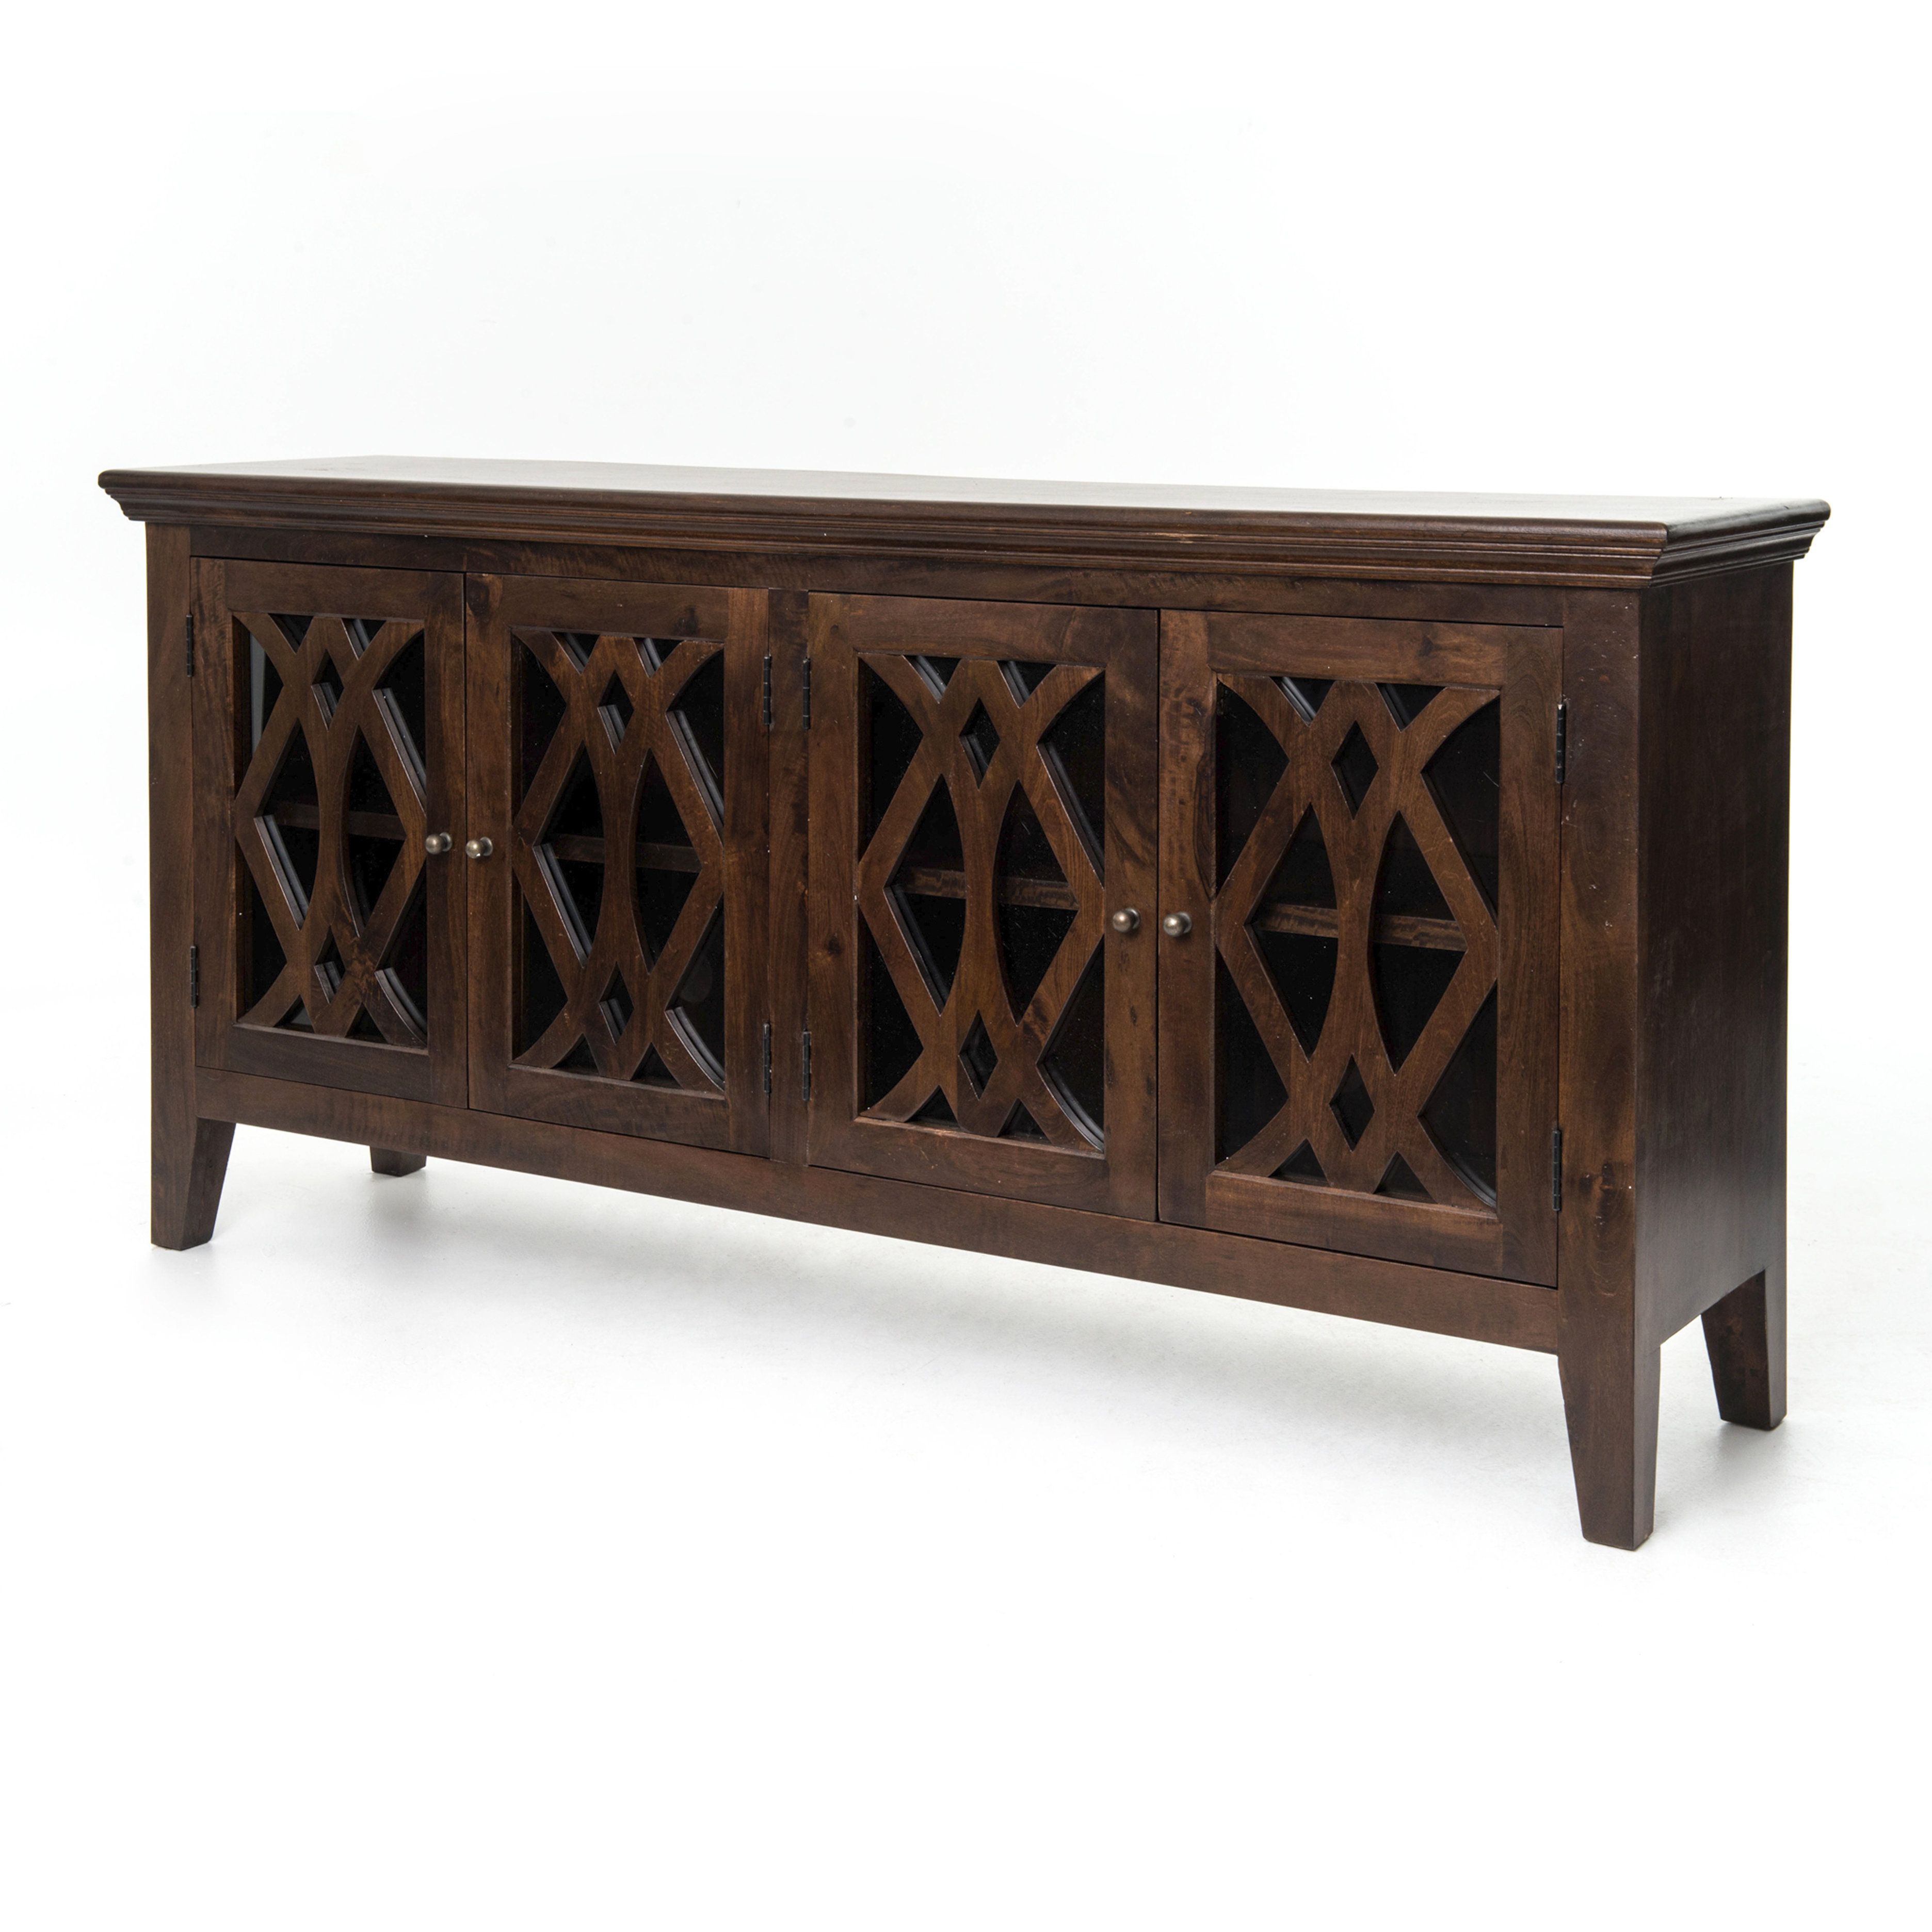 Assembled Sideboards & Buffets | Joss & Main Intended For Most Current Fugate 2 Door Credenzas (View 17 of 20)